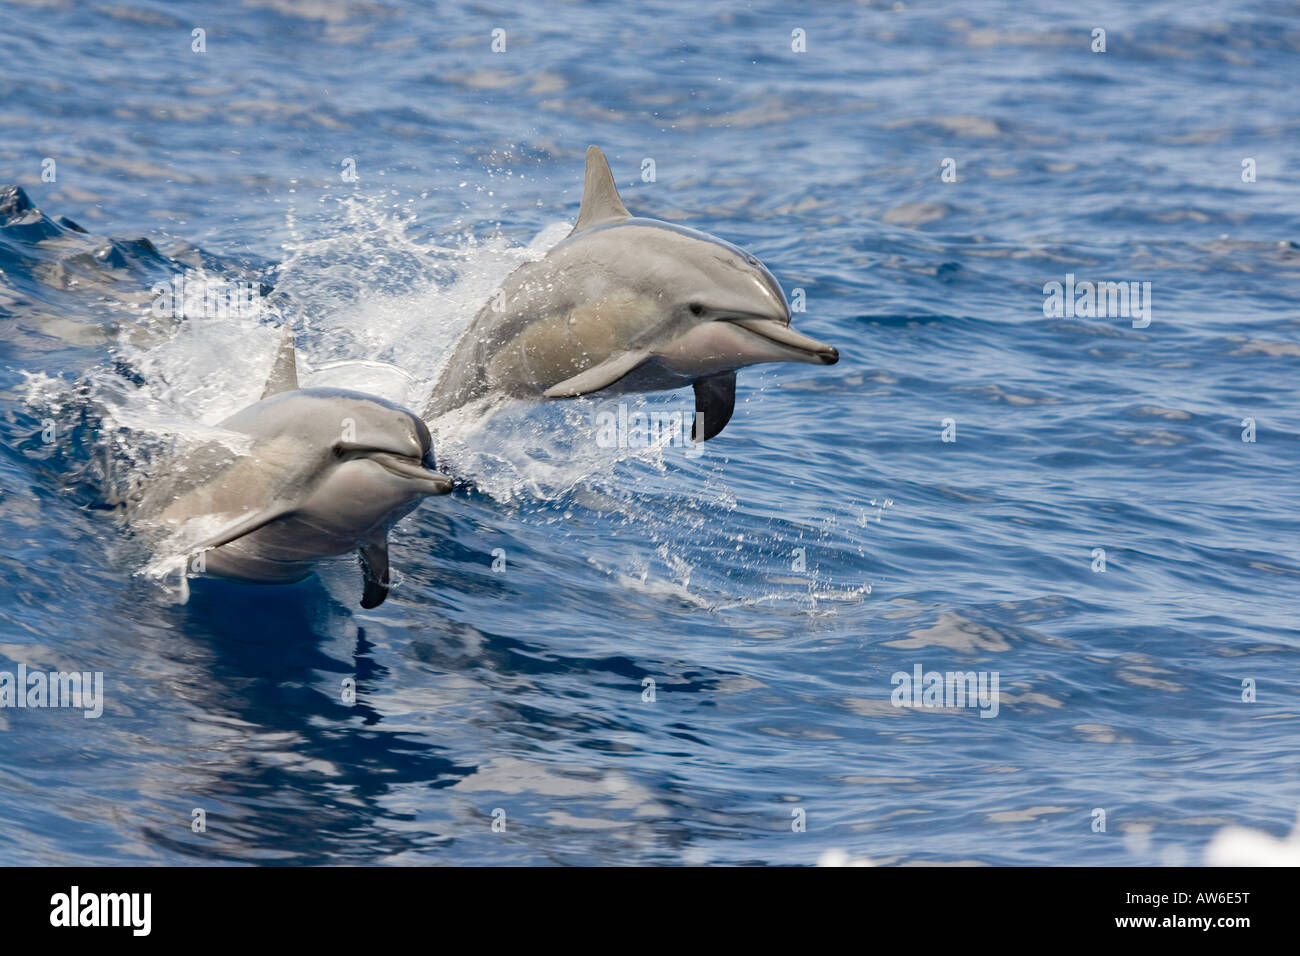 Two spinner dolphin, Stenella longirostris, leap into the air at the same time, Hawaii. Stock Photo